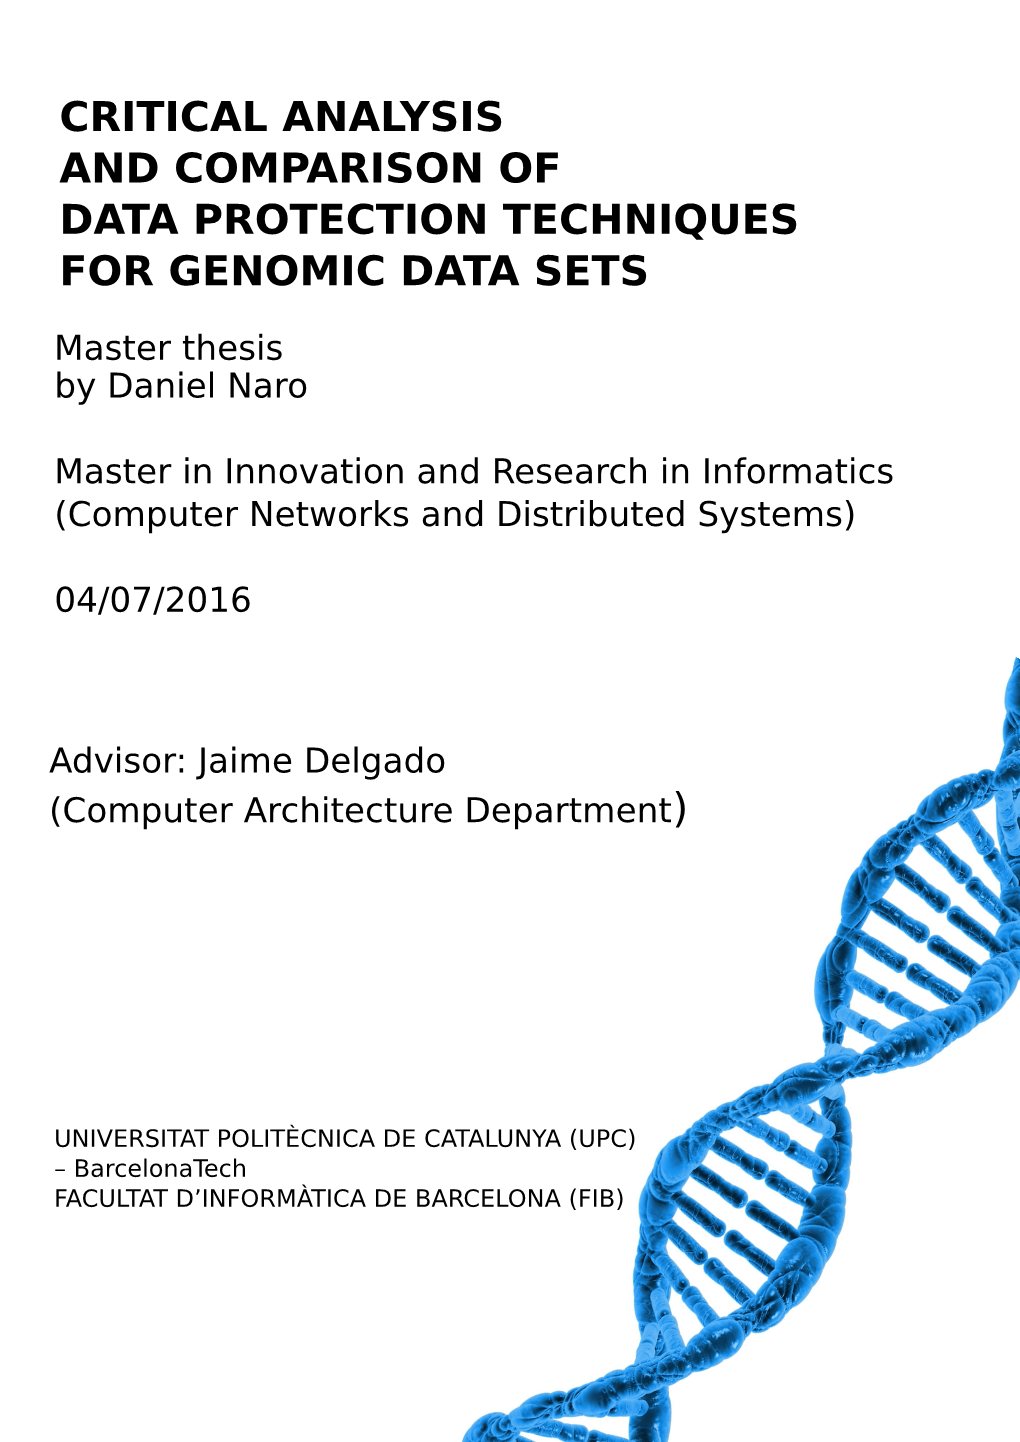 Critical Analysis and Comparison of Data Protection Techniques for Genomic Data Sets